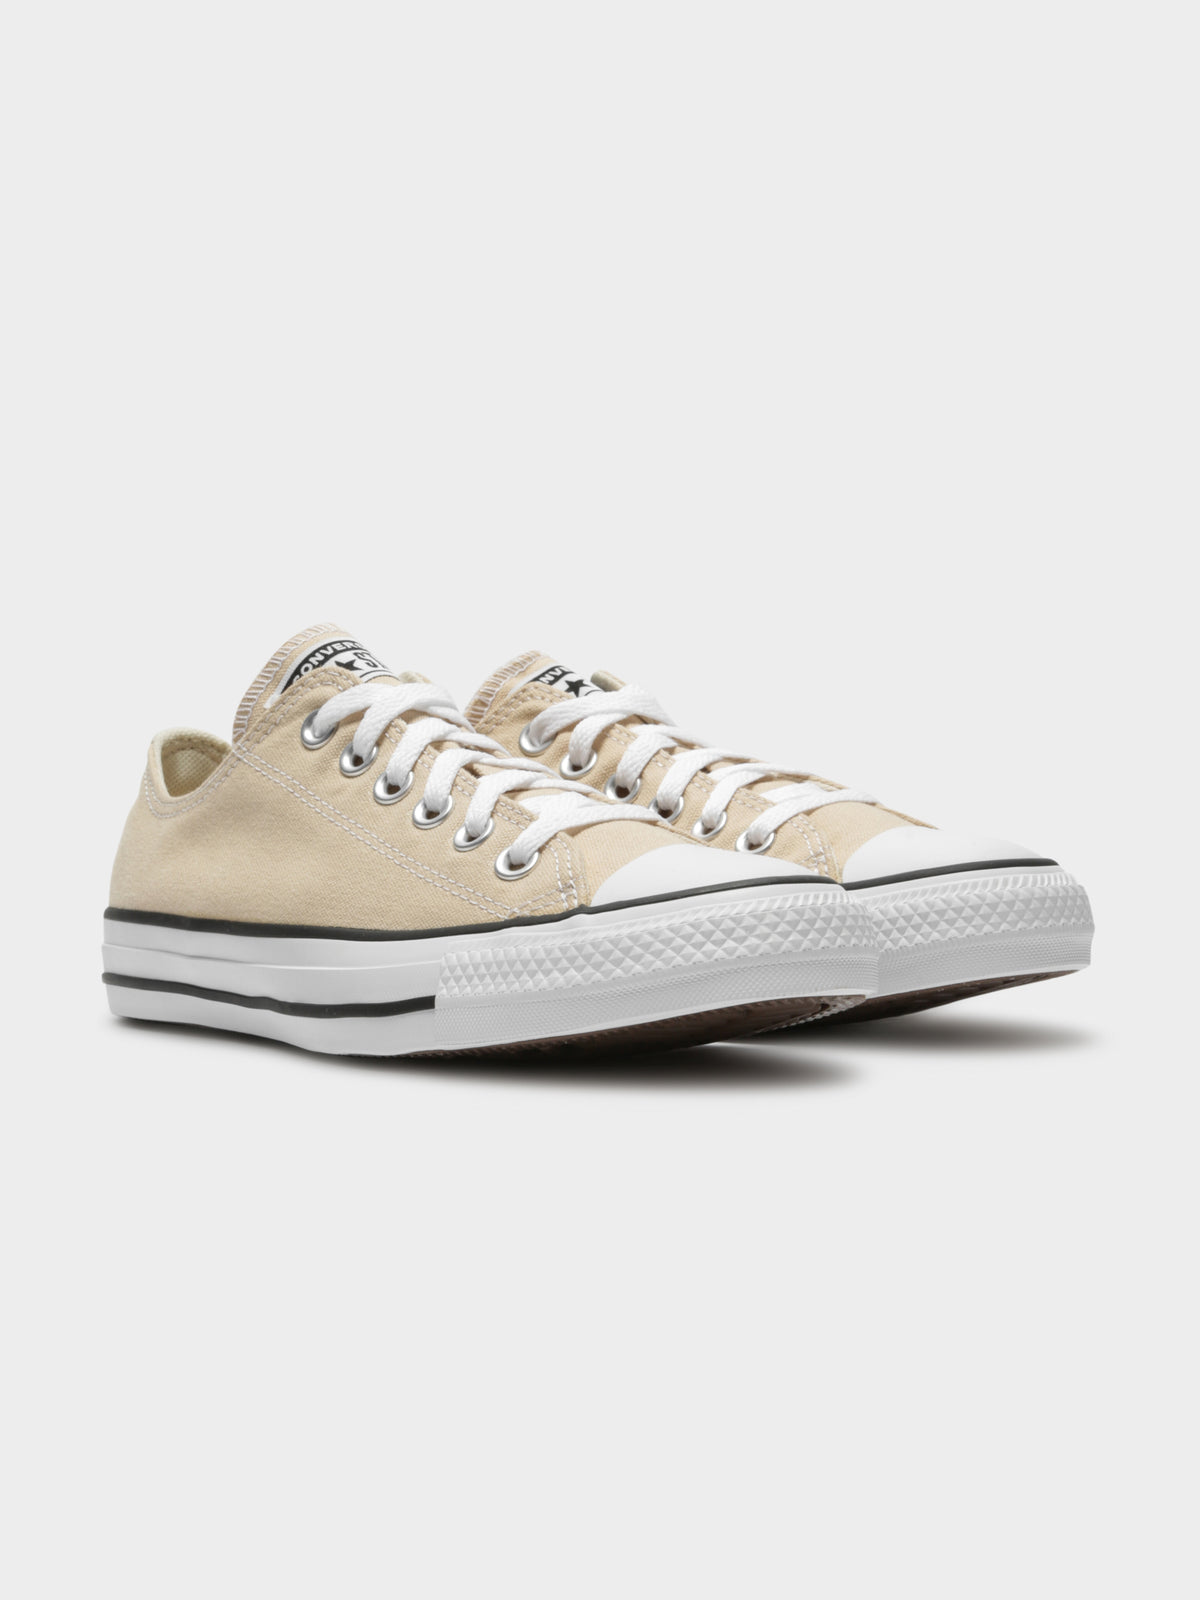 Unisex Chuck Taylor All Star Low Sneakers in Farro